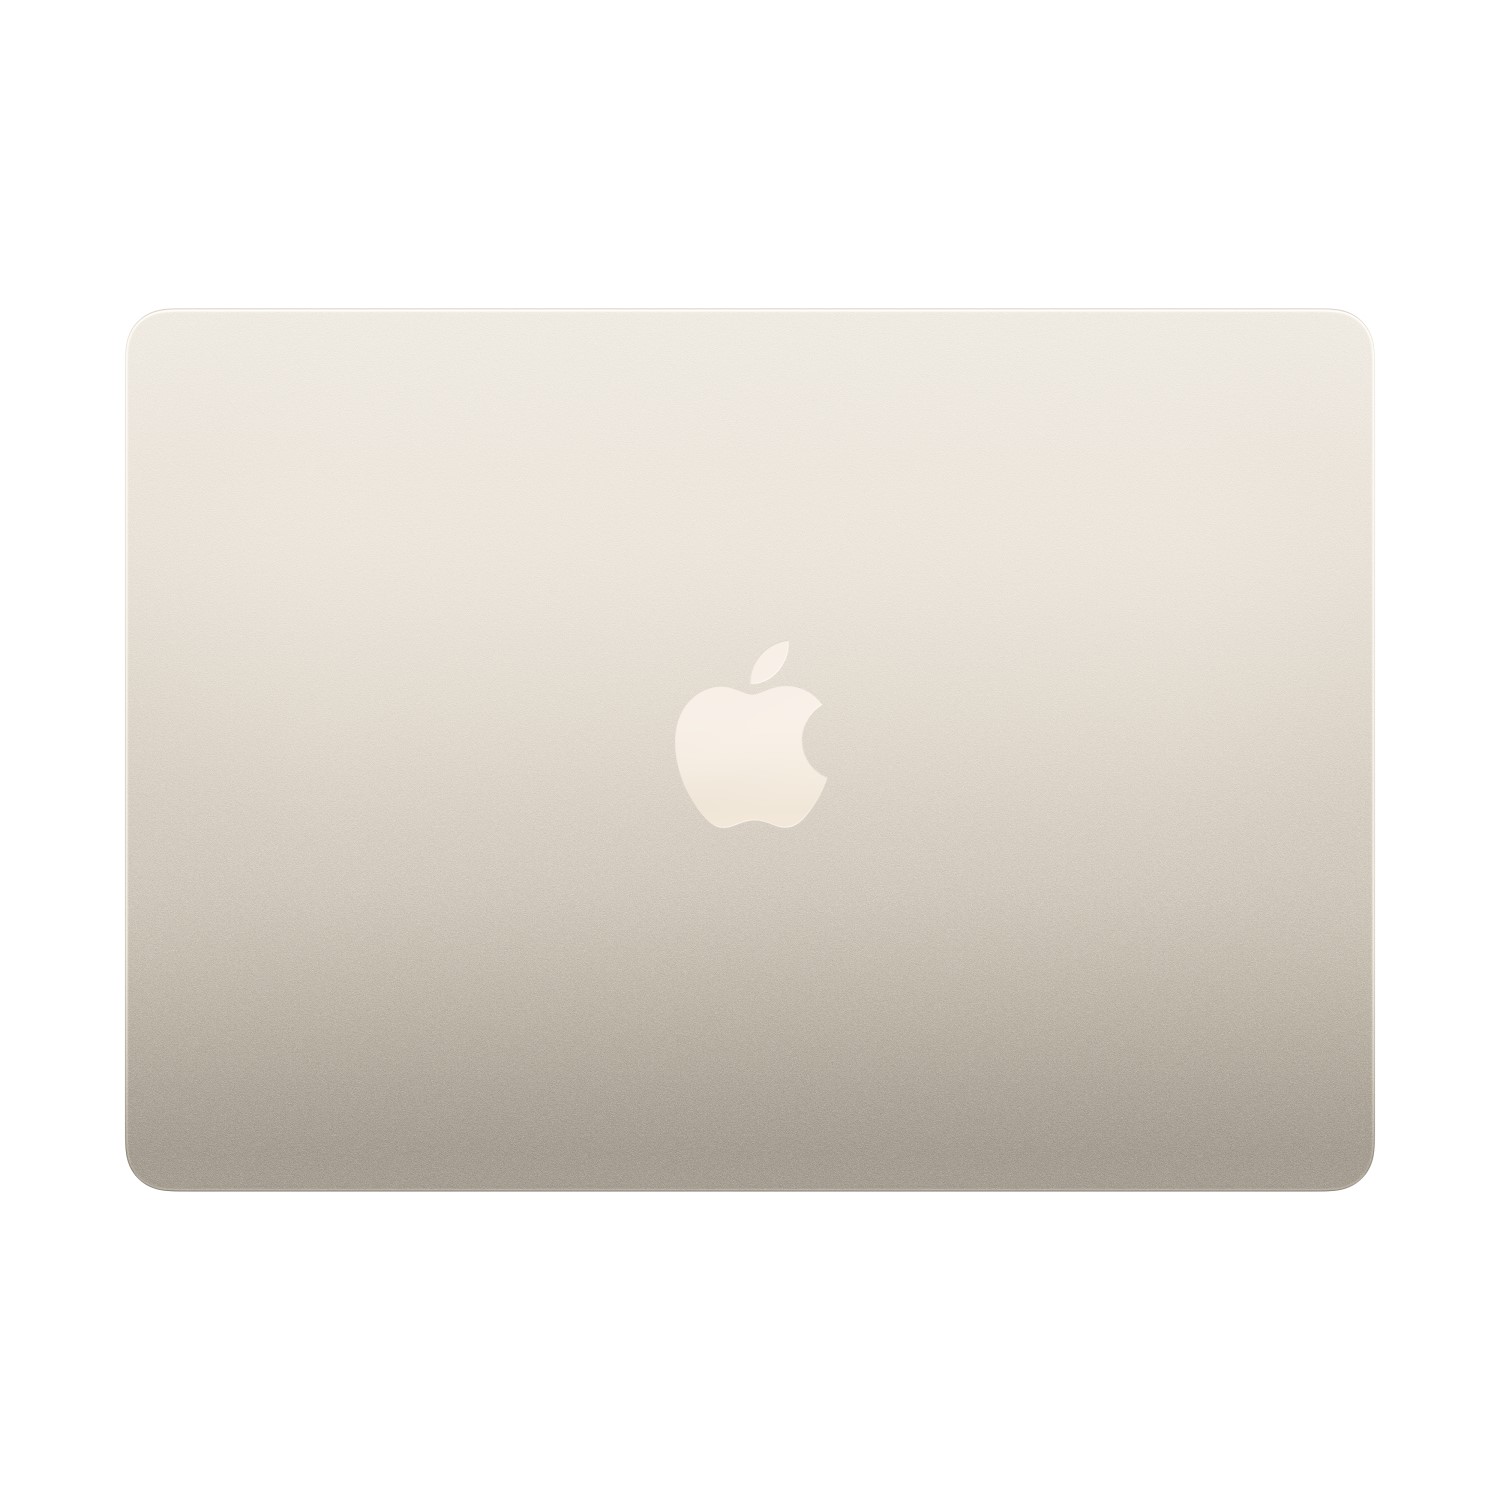 15-inch MacBook Air: Apple M3 chip with 8-core CPU and 10-core GPU, 512GB SSD, , large image number 2